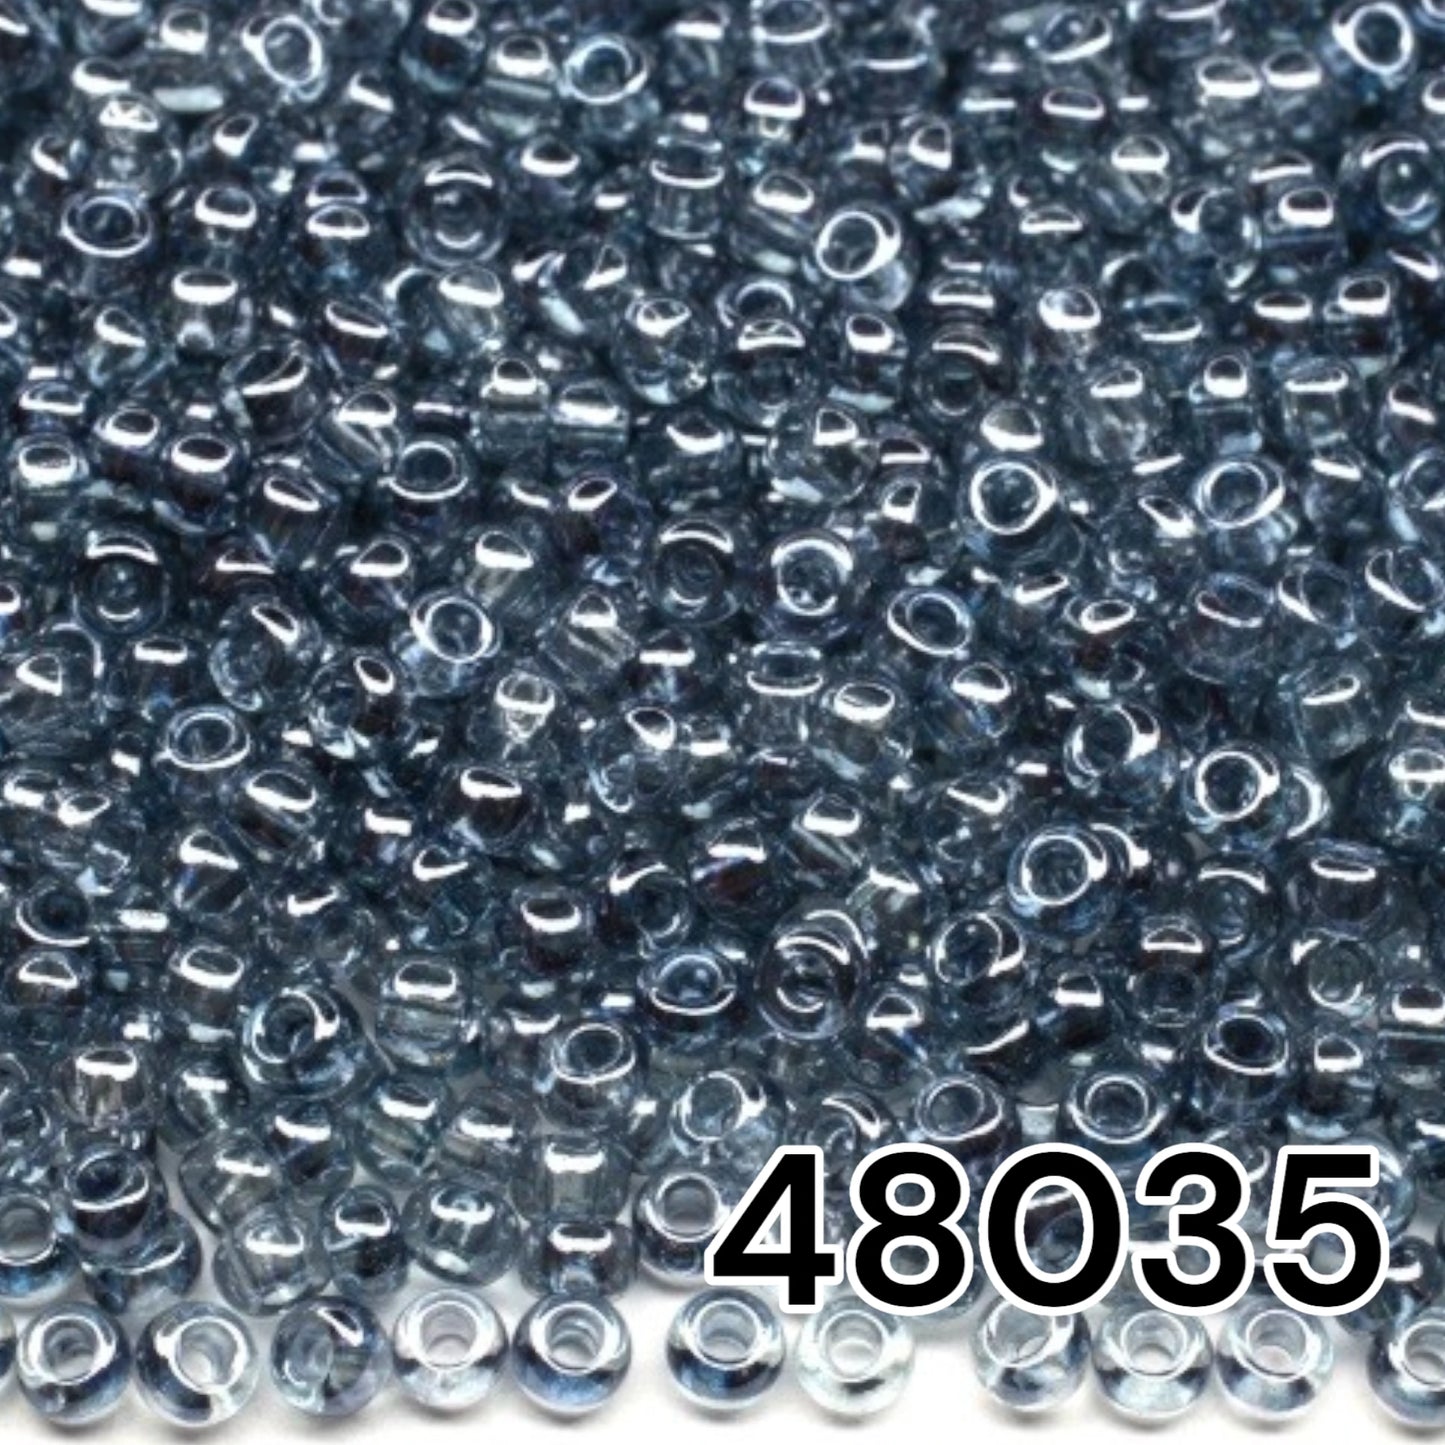 48035 Czech Seed Beads Preciosa Rocailles Crystal Color Lustered